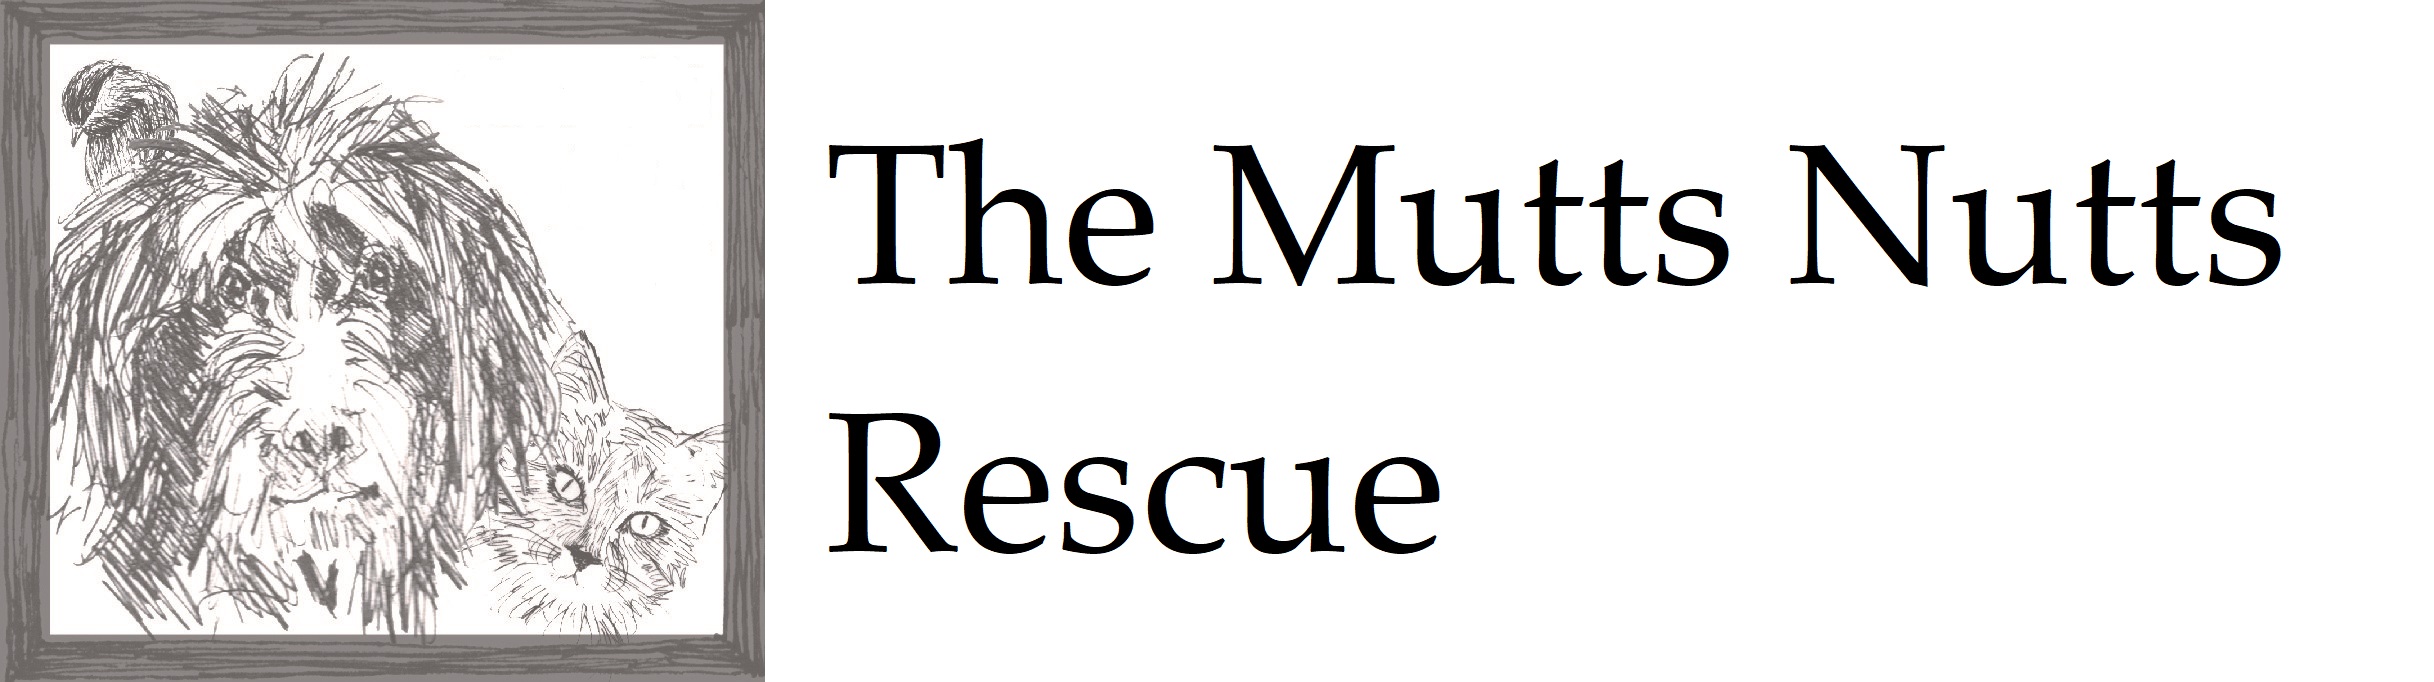 The Mutts Nutts Rescue